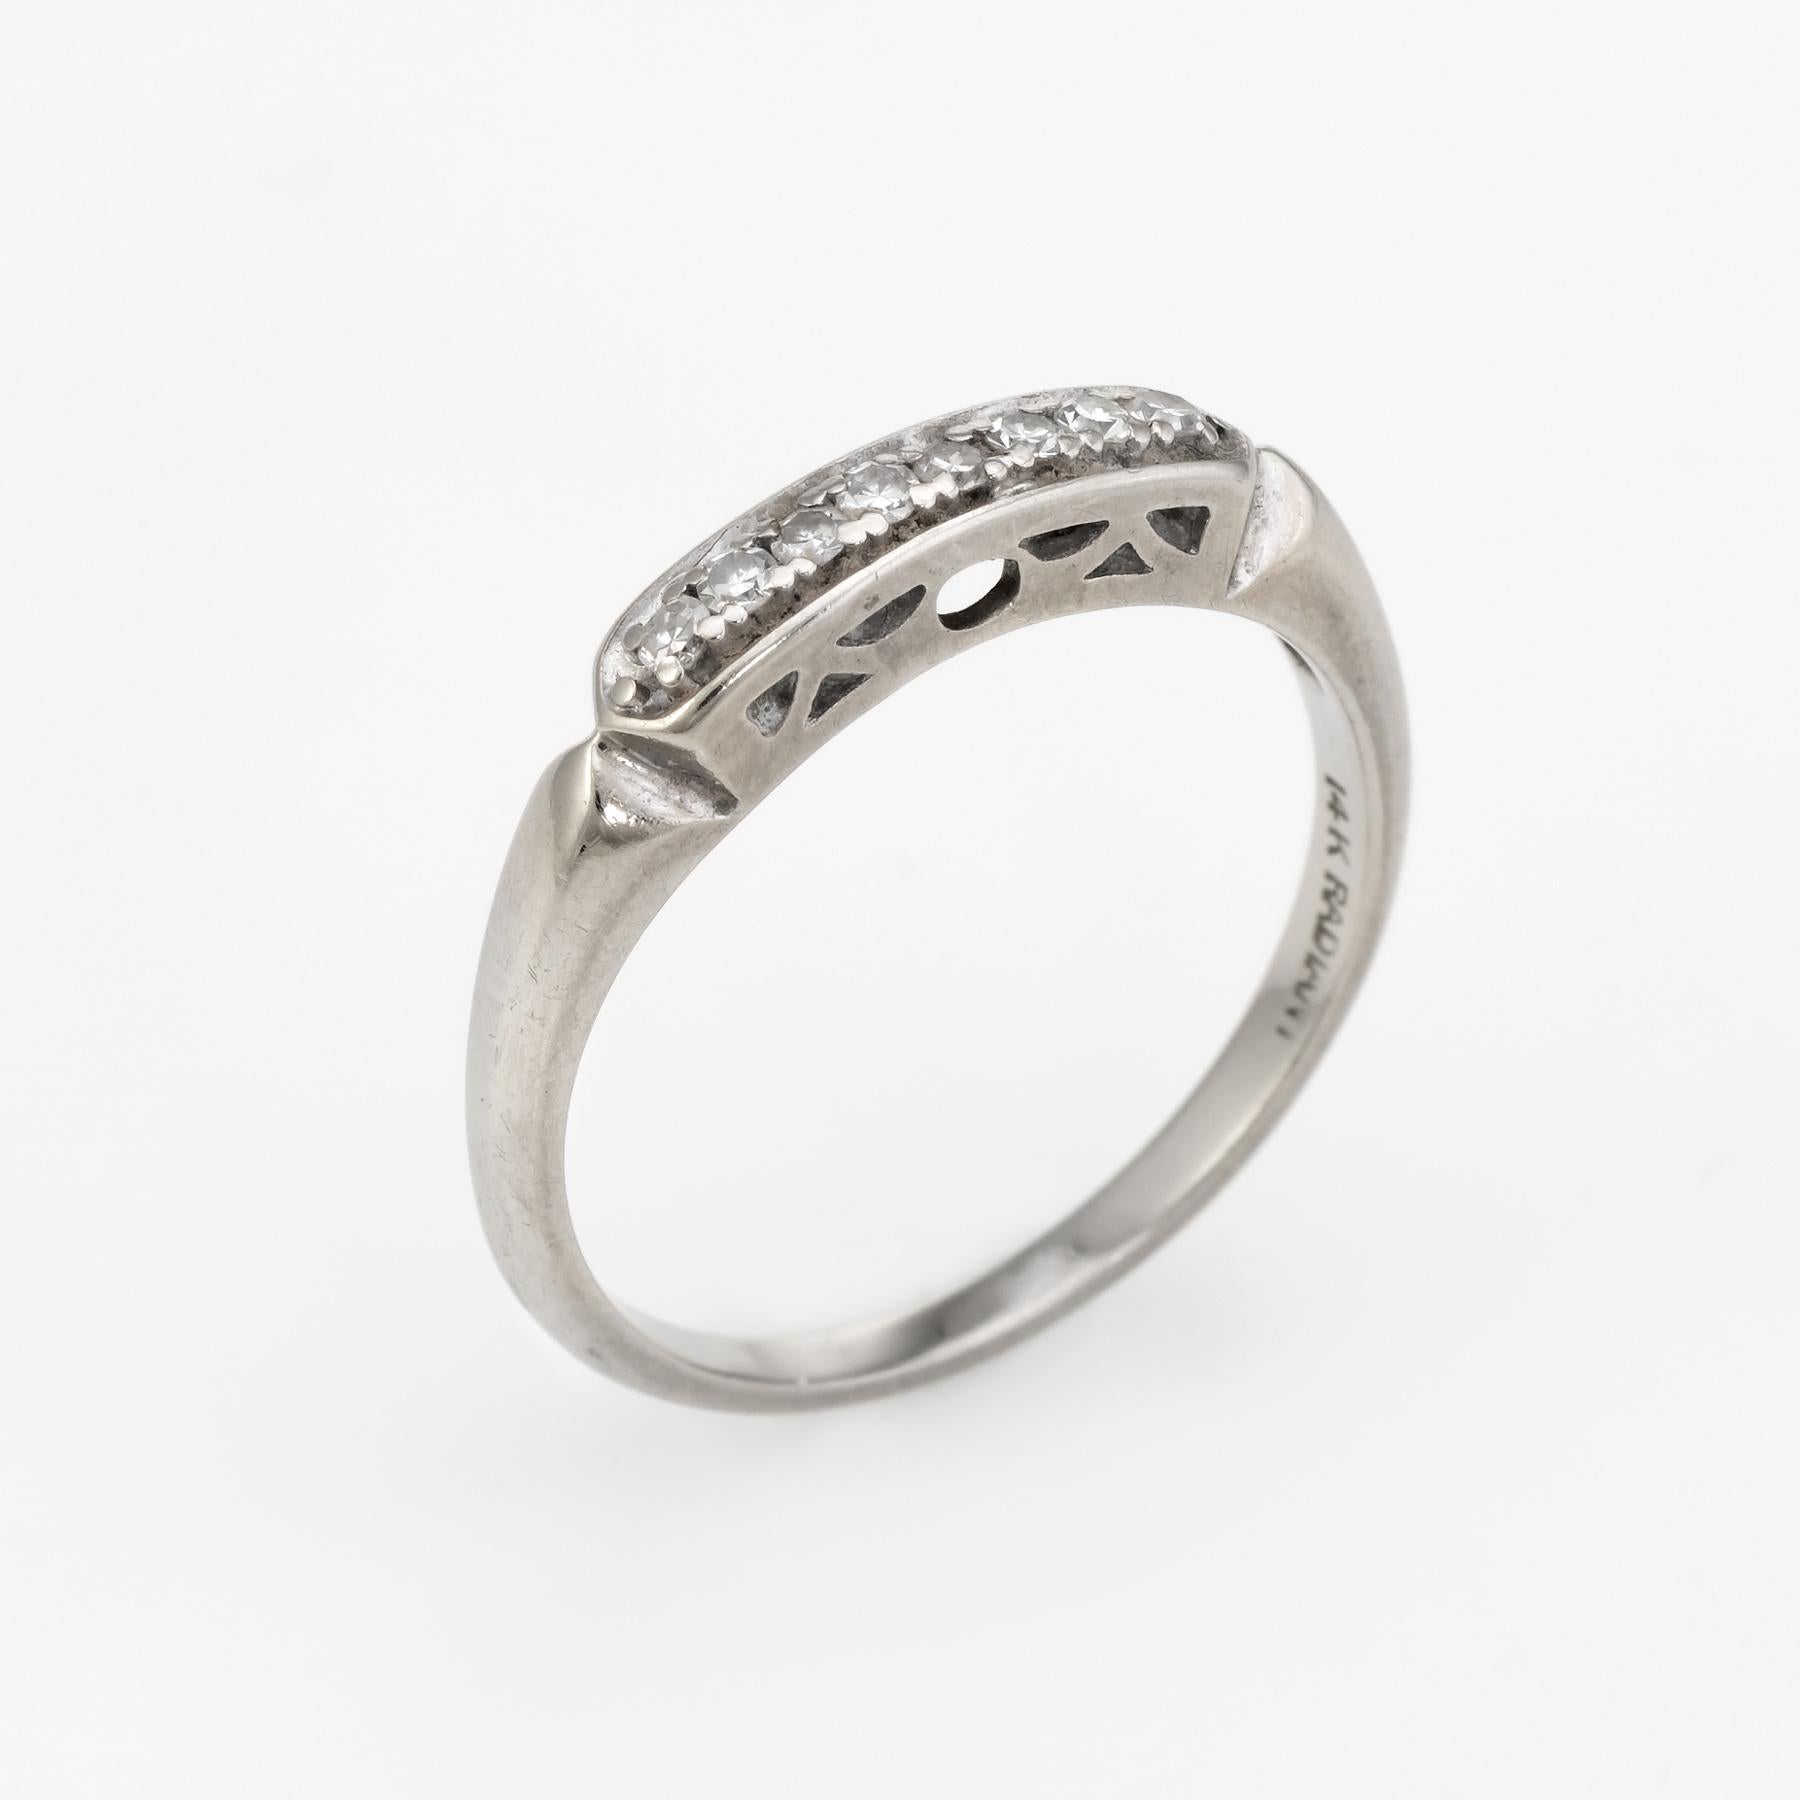 Finely detailed diamond wedding band (circa 1940s to 1950s), crafted in 14 karat white gold.

Single cut diamonds total an estimated .16 carats (estimated H-I color and VS2 clarity).
 
The ring is in excellent condition. 

Particulars:

Weight: 2.1